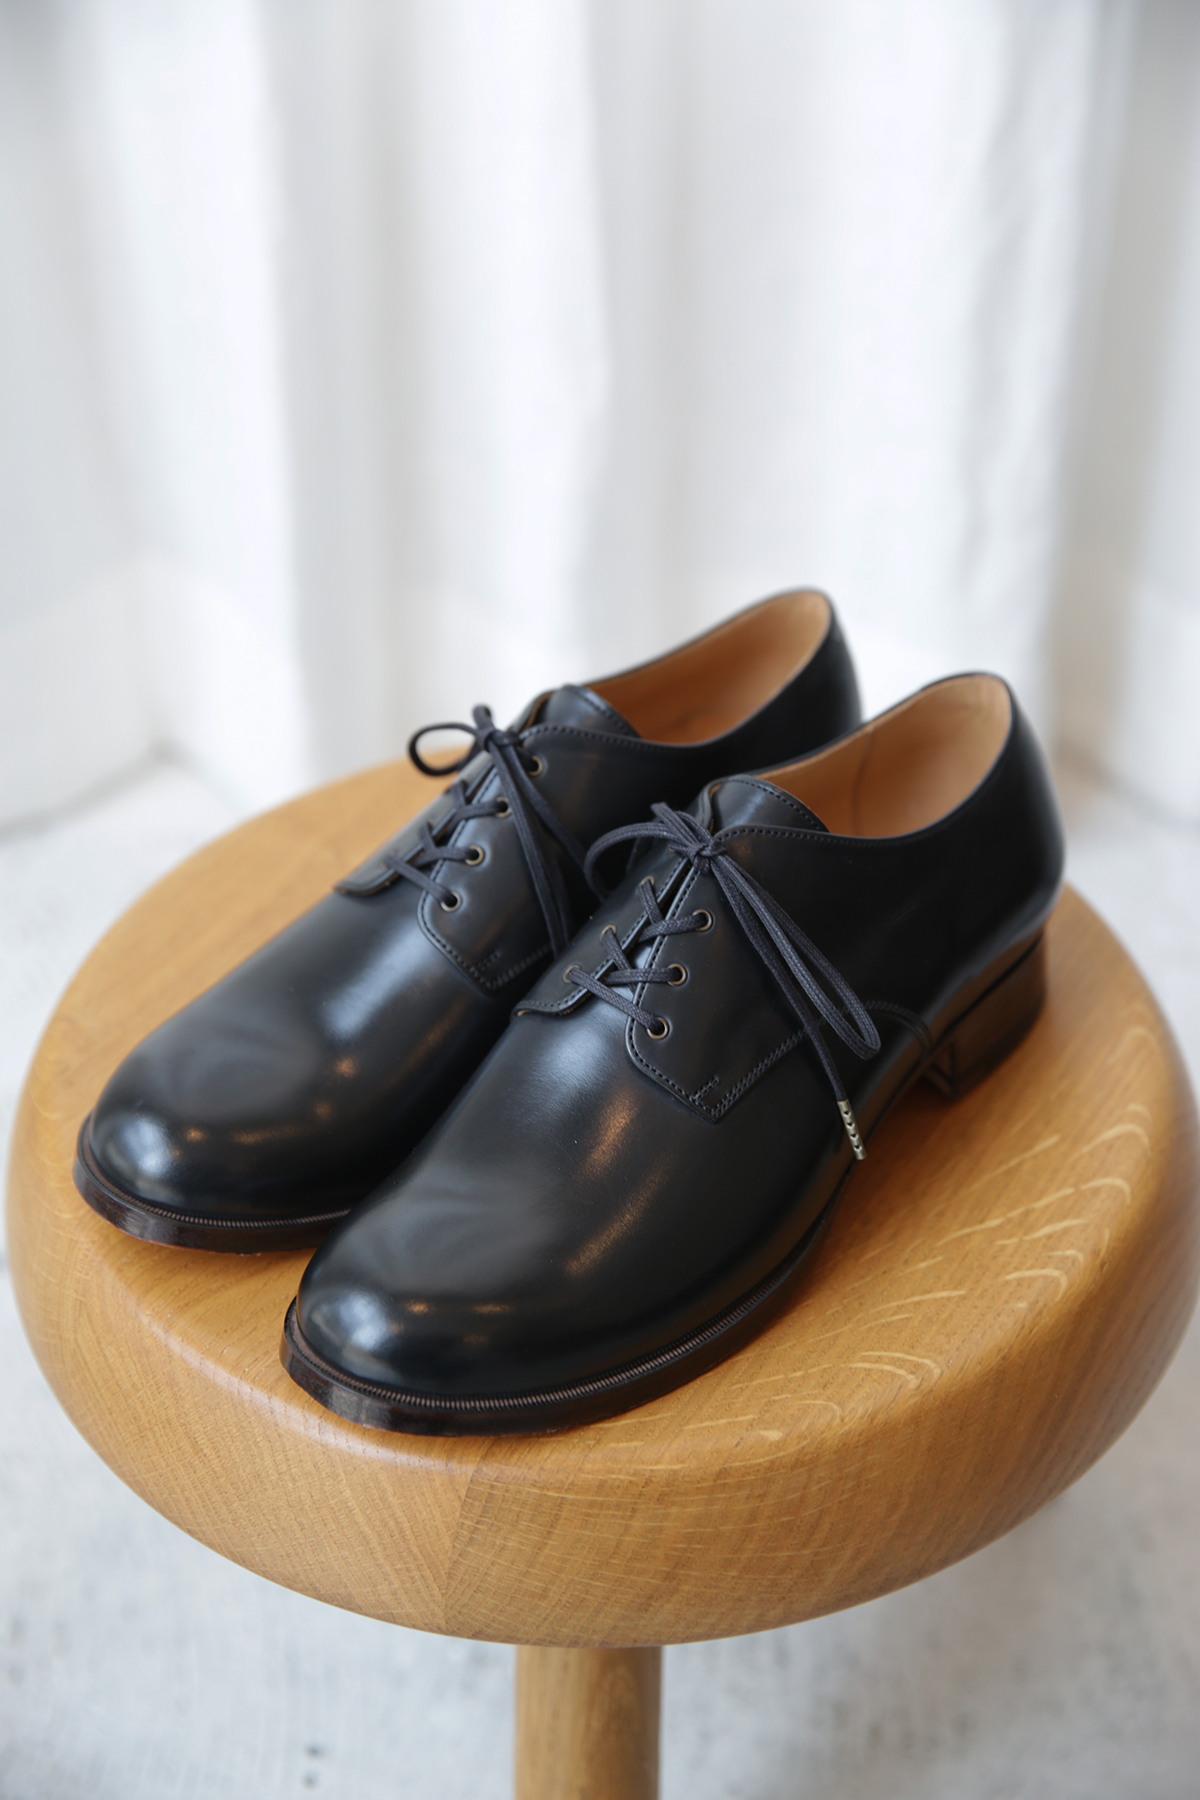 Blucher plain toe 4 hole/Baby calf mckay | ANOTHER LOUNGE